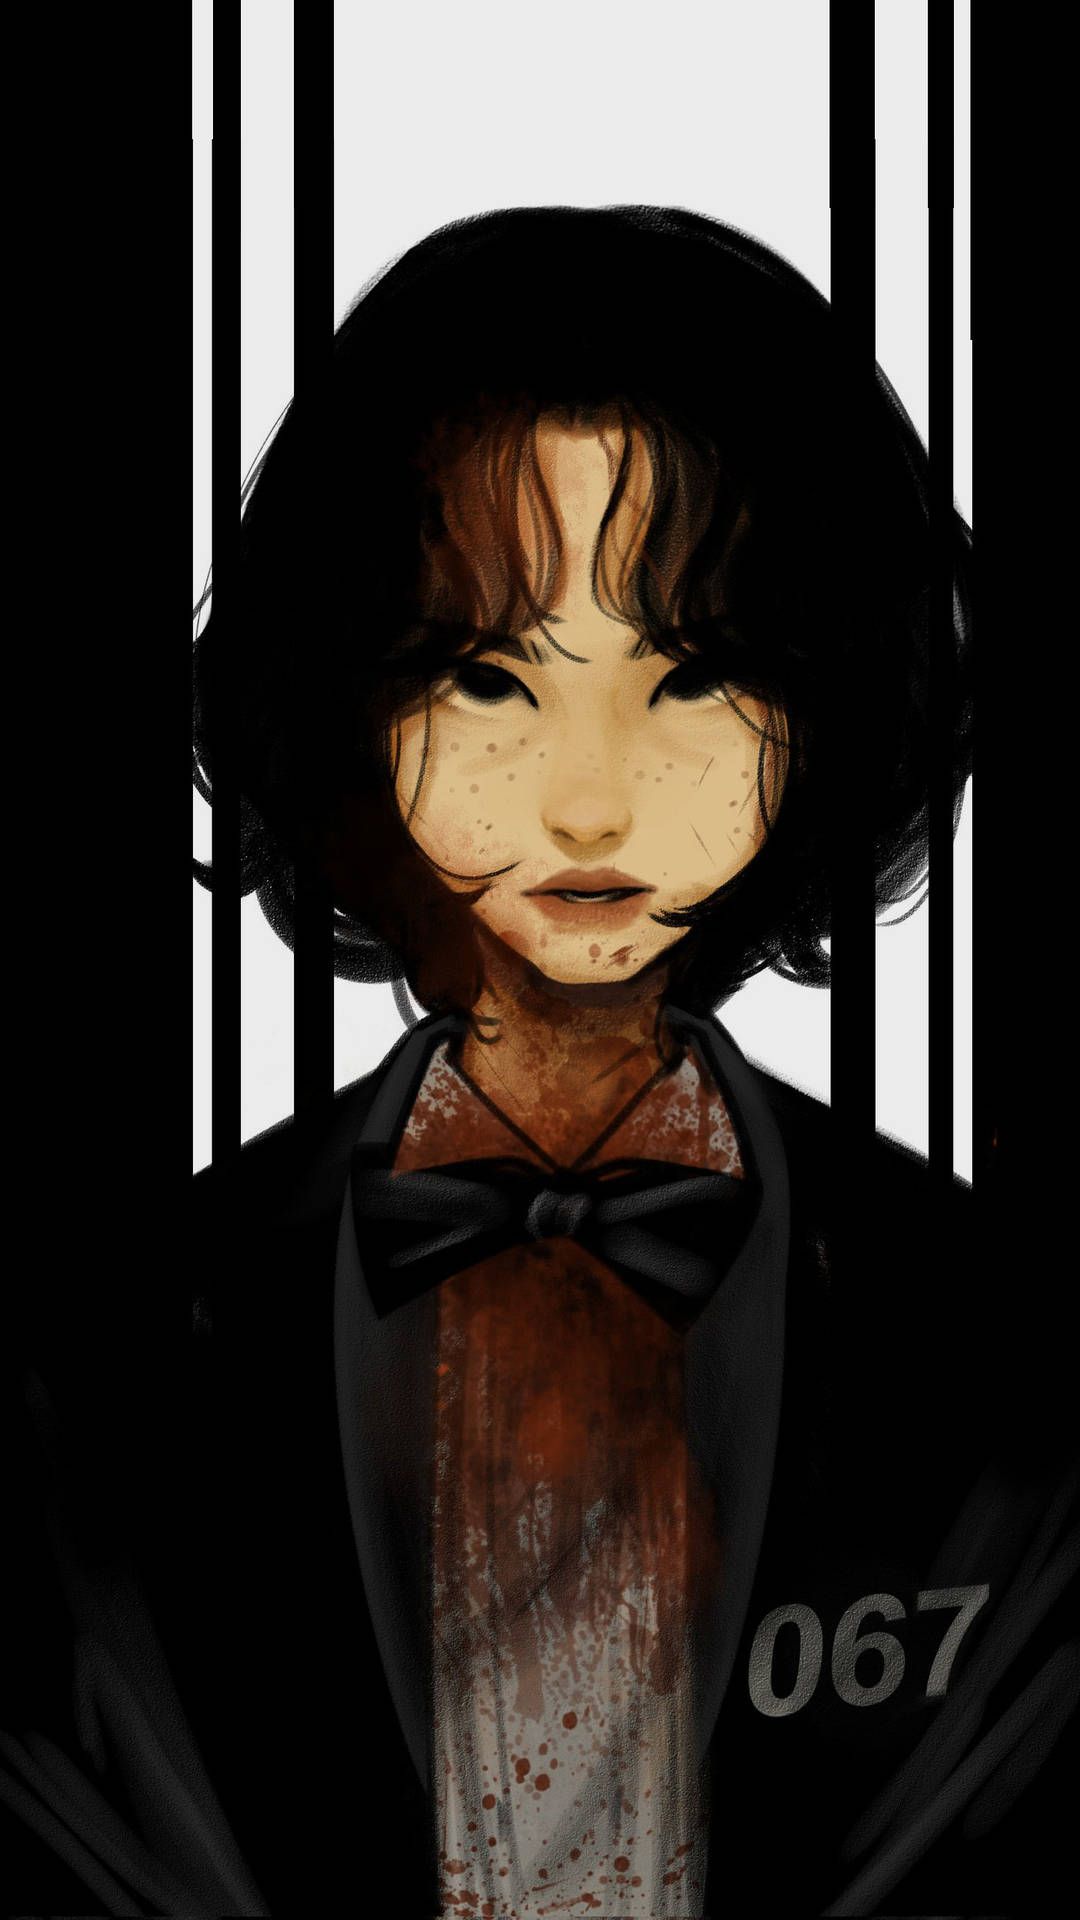 Digital art of a woman with short hair and a bow tie - Squid Game